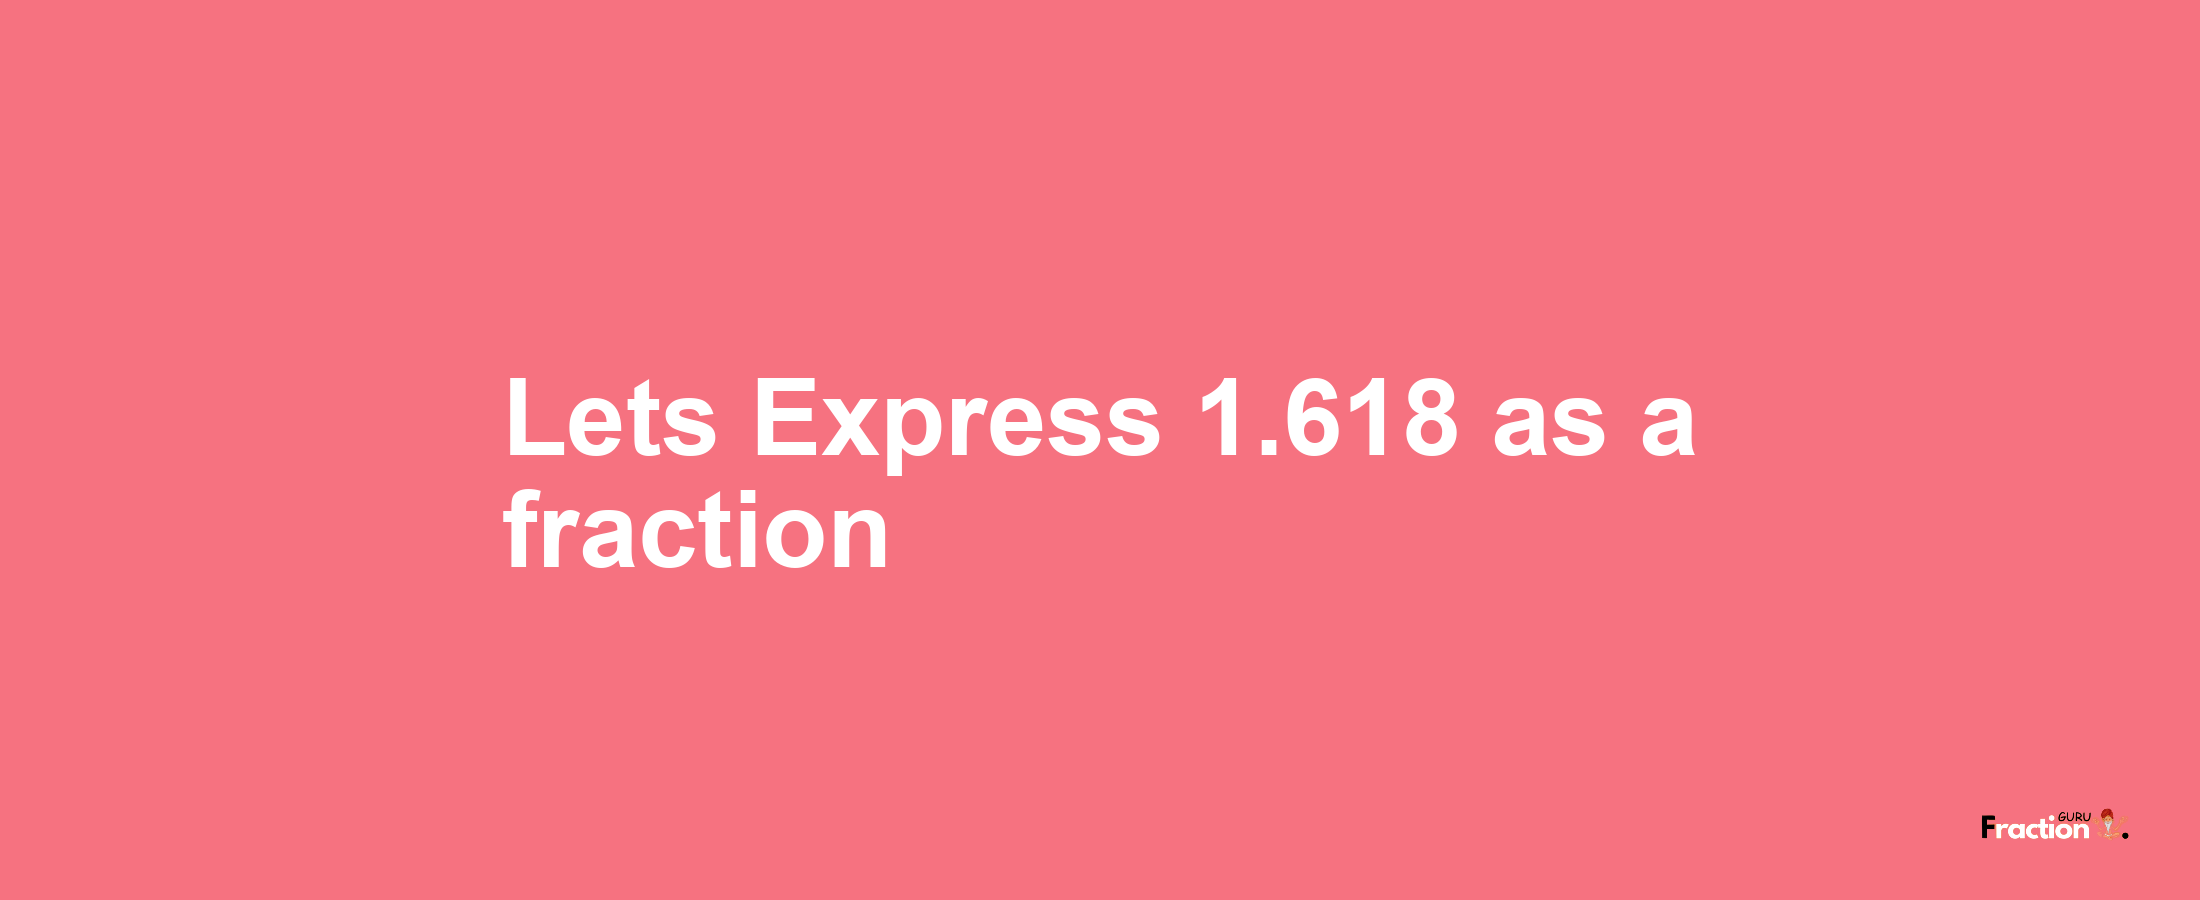 Lets Express 1.618 as afraction